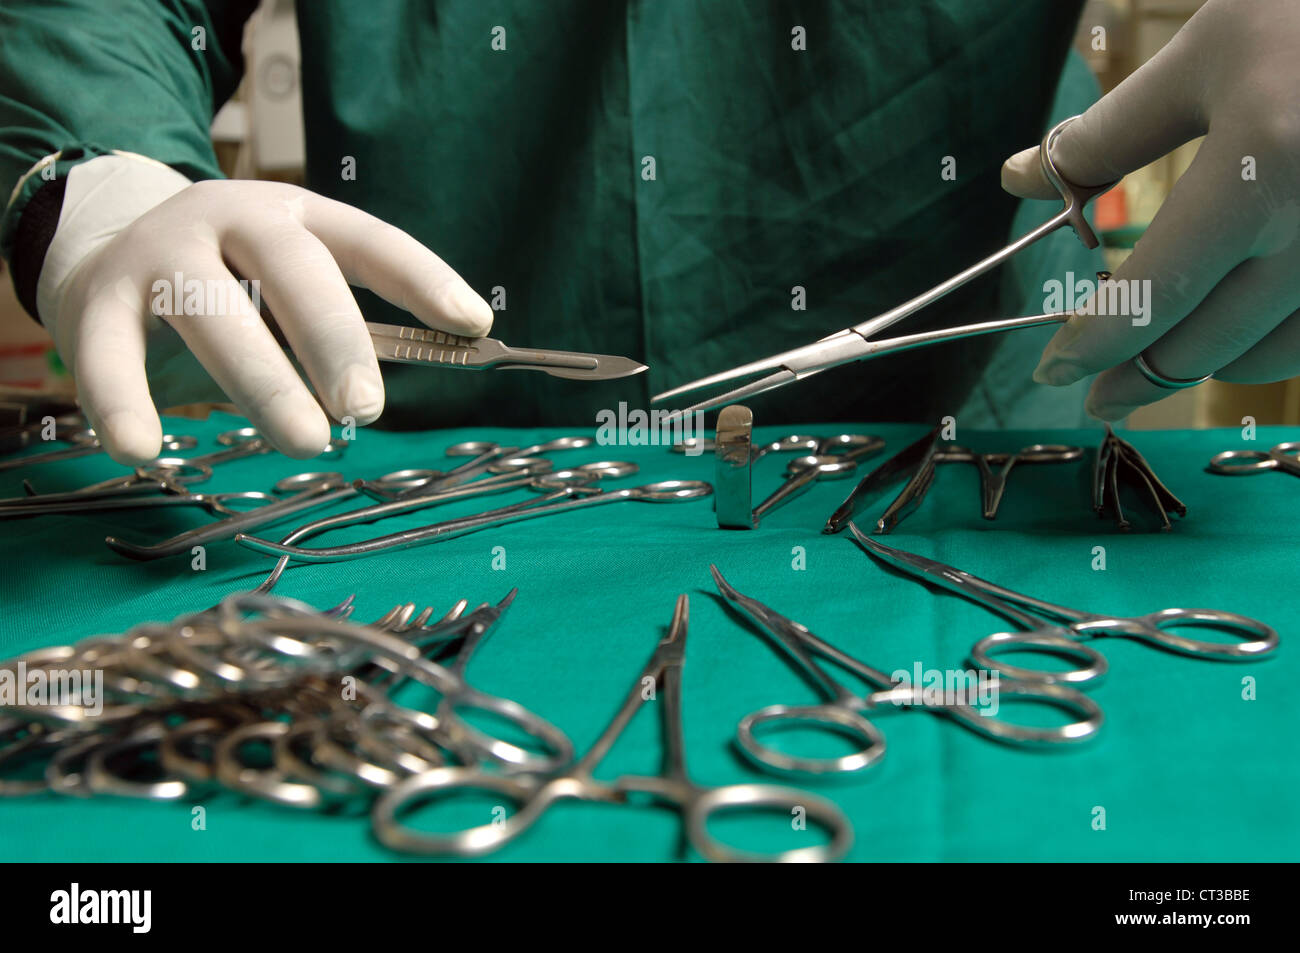 Close-up on the hands of a surgeon holding a scalpel and a pair of forceps over a table laden with various surgical tools. Stock Photo